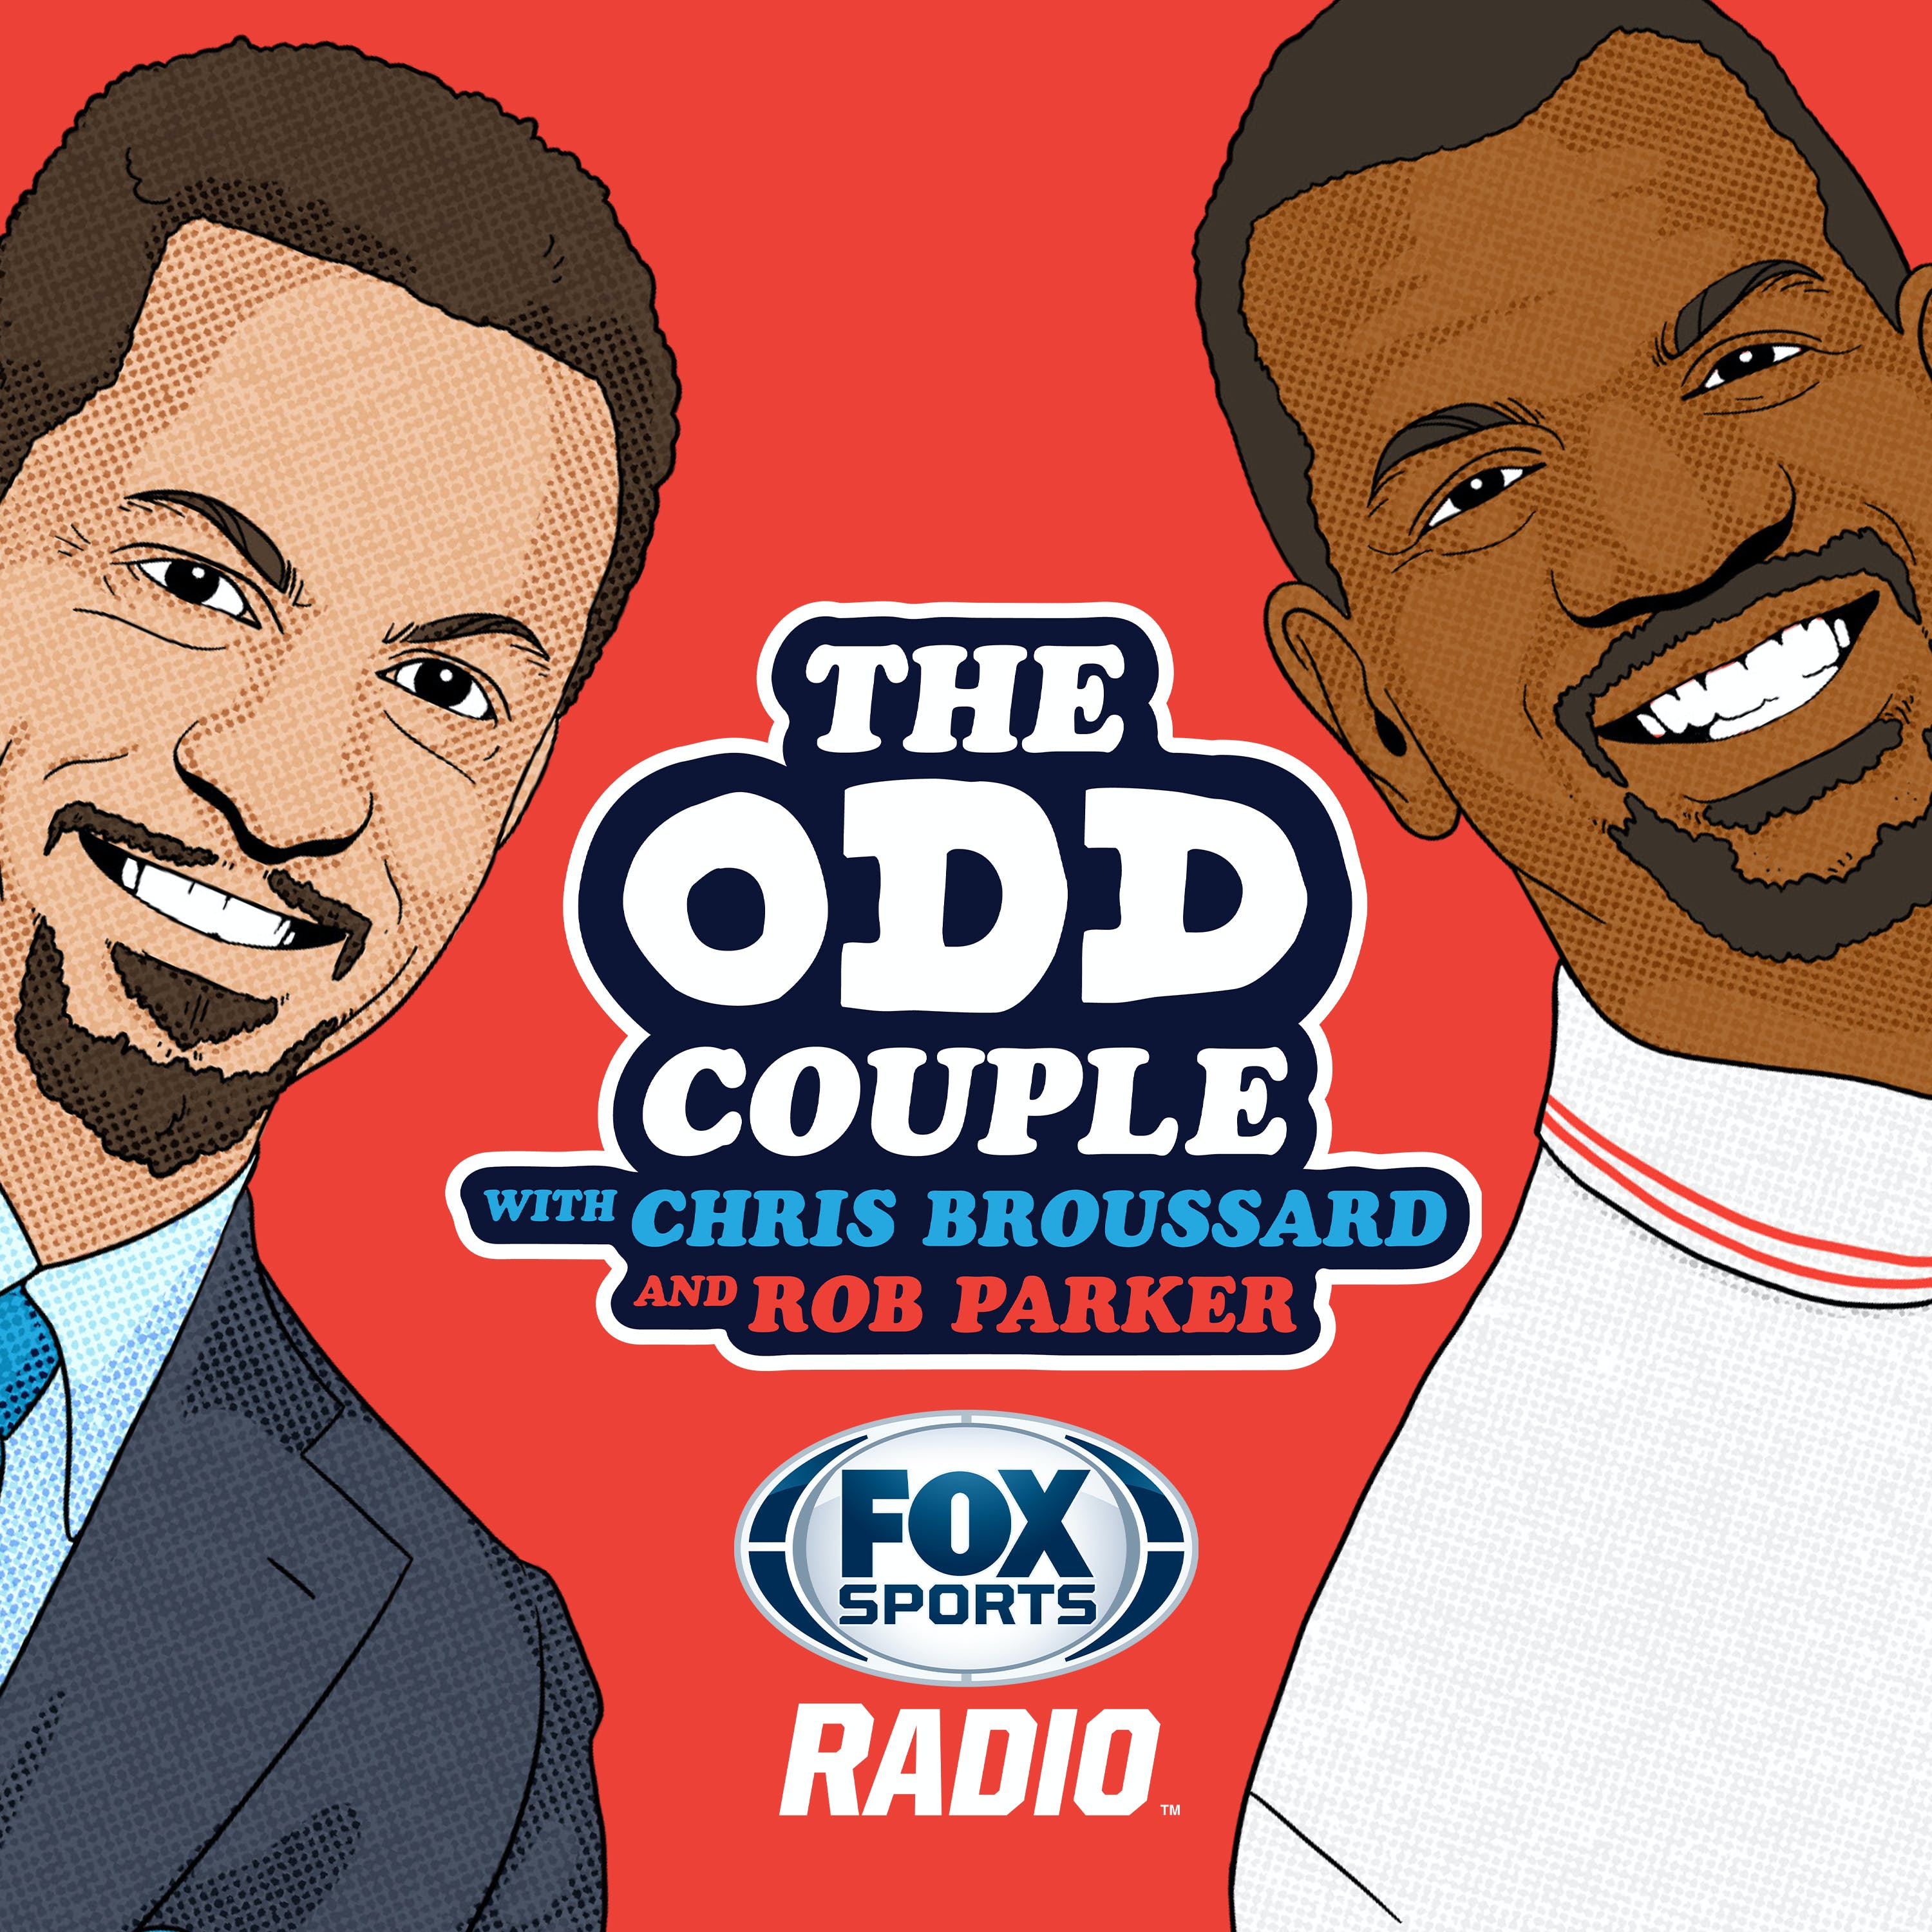 01/17/2022 - Best of The Odd Couple